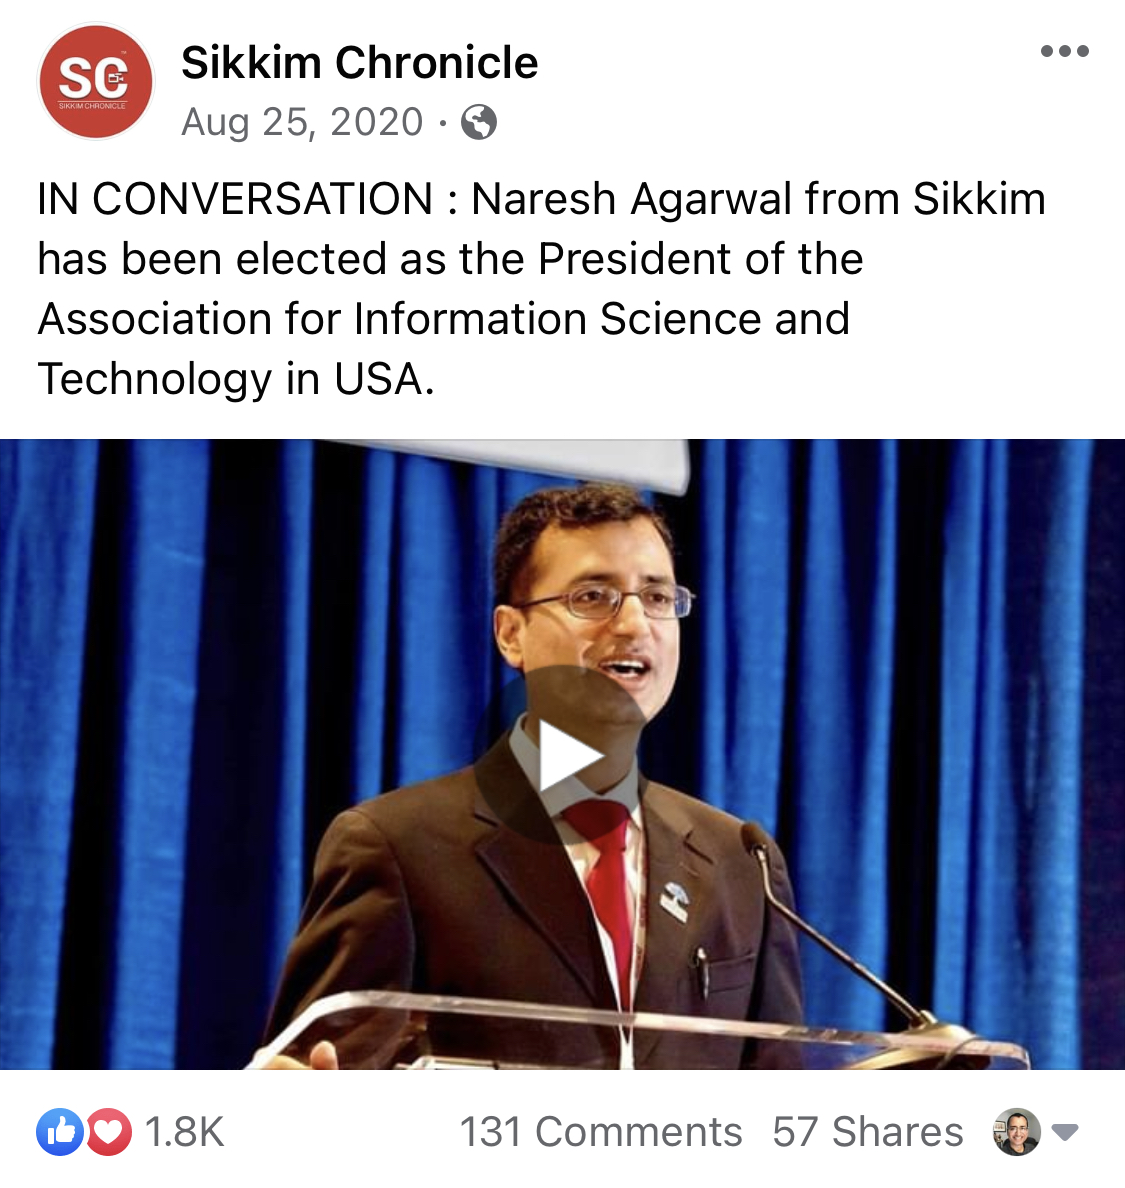 Sikkim Chronicle - ASIS&T President-elect